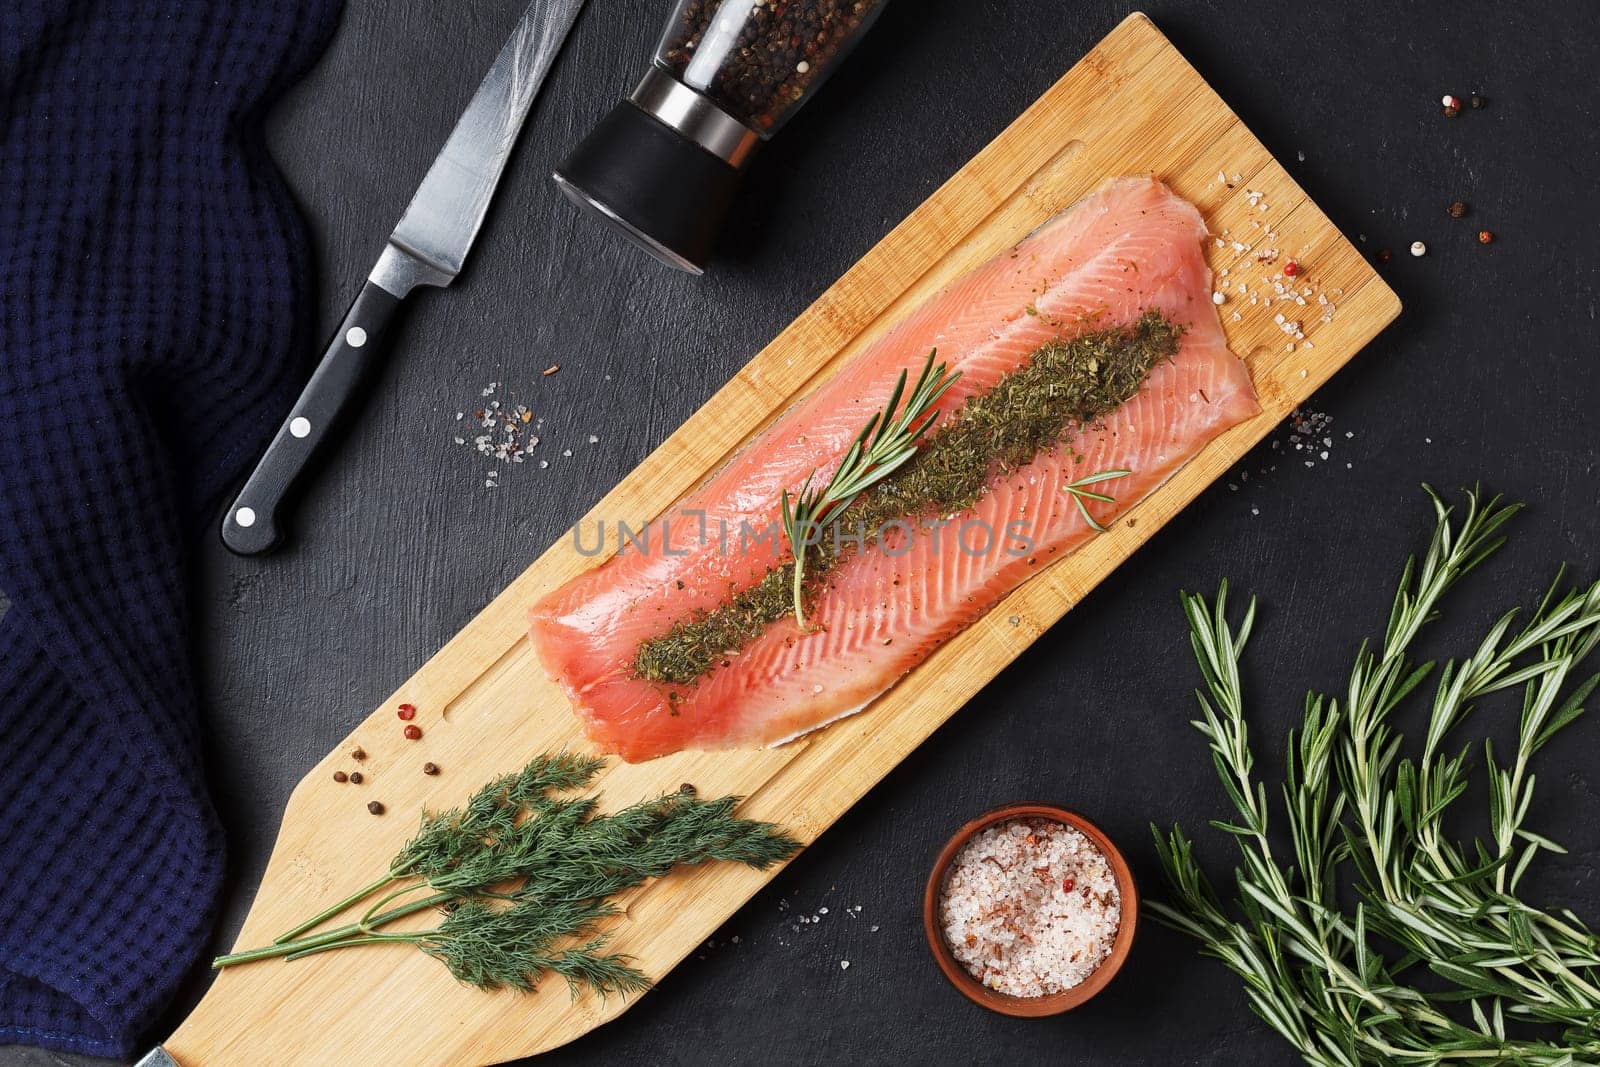 Salted fish fillet with spices and herbs:dill and rosemary on a wooden board on a black background. by lara29